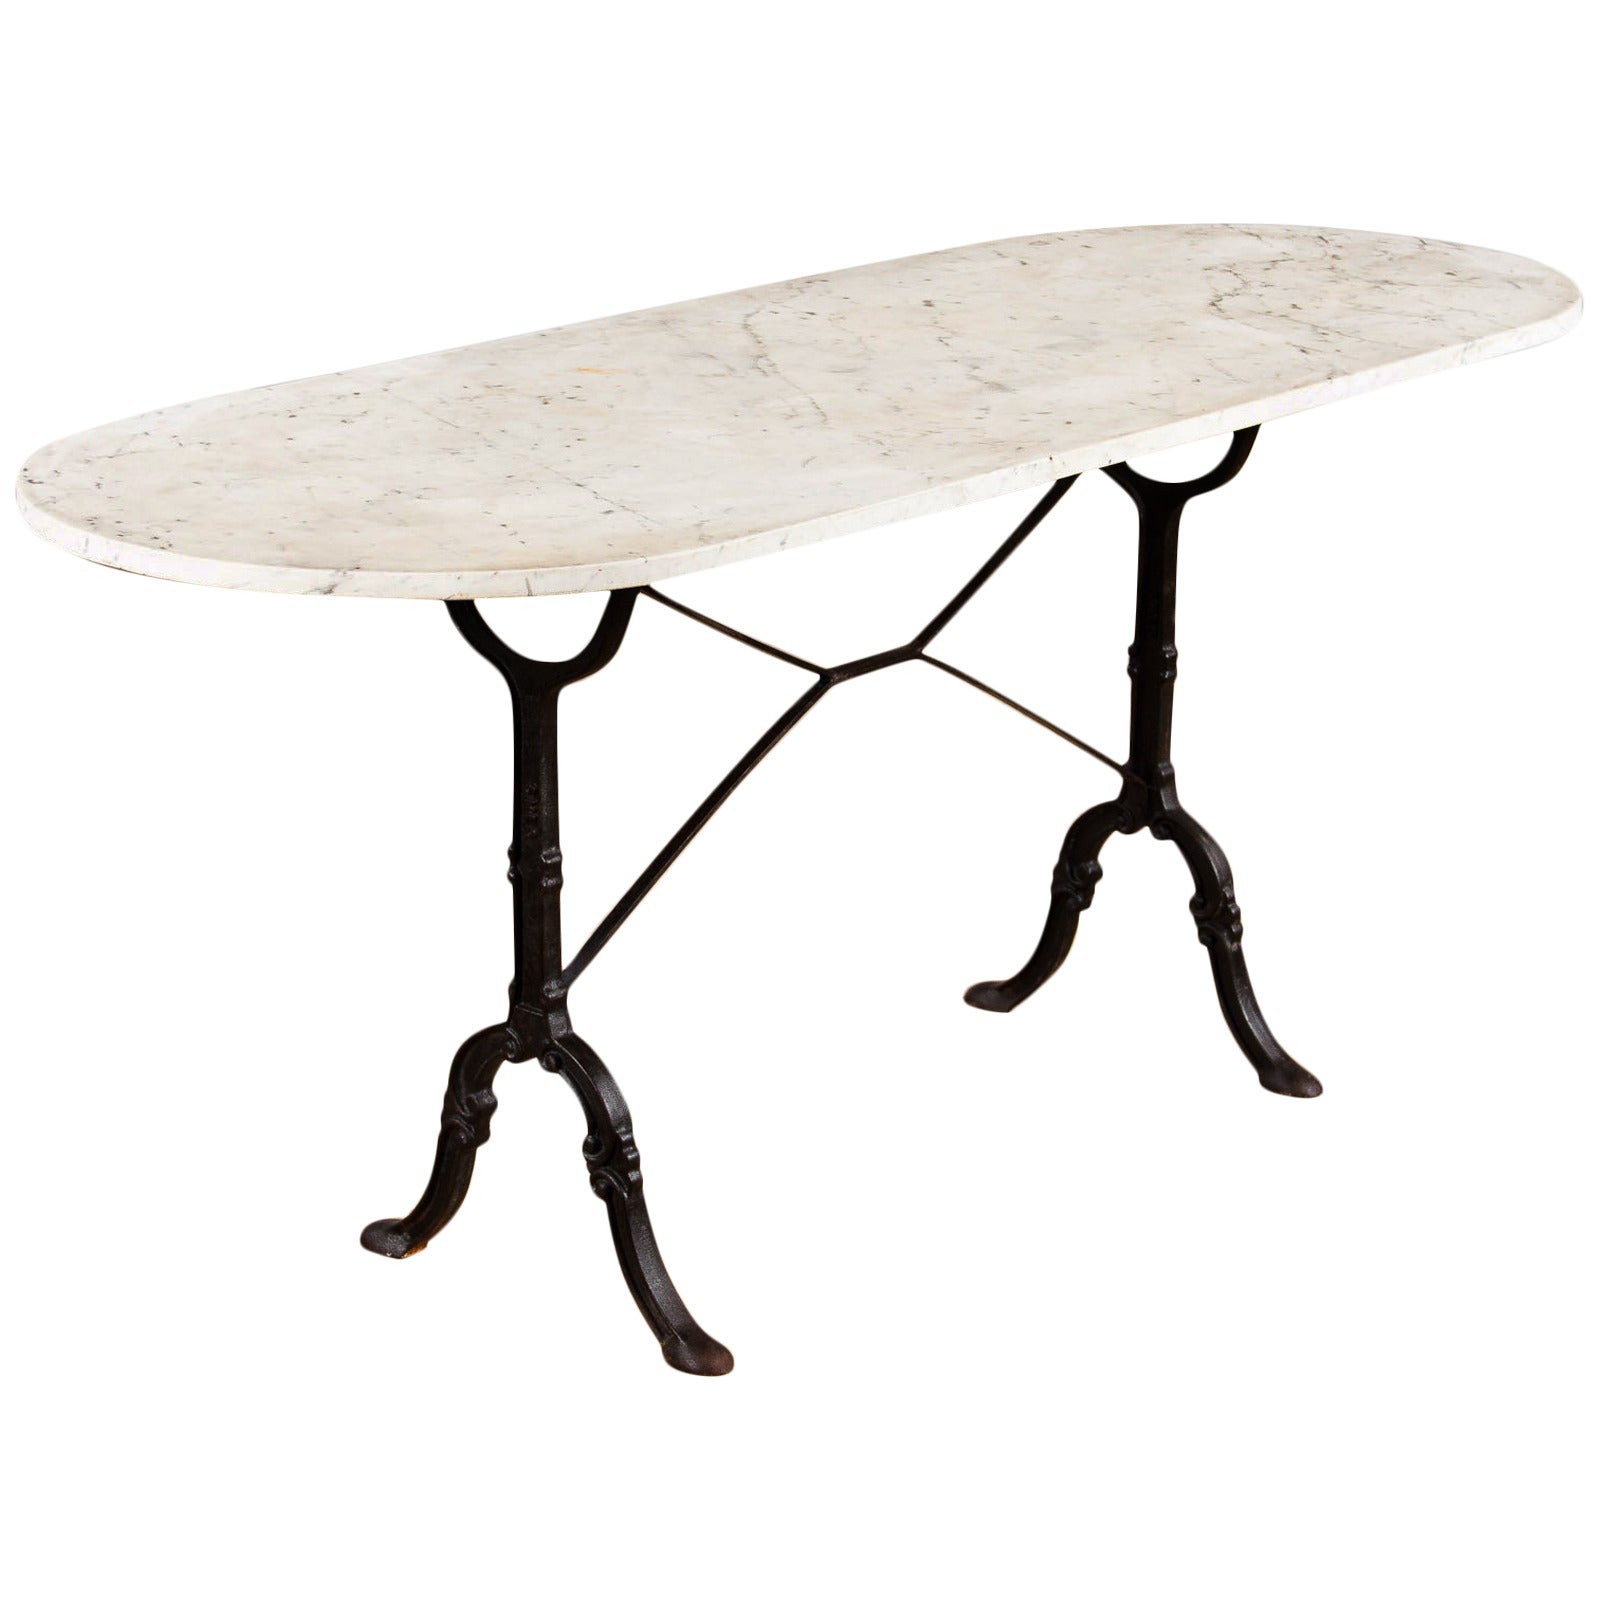 French Bistro Table with Oval White Marble Top, 1920s